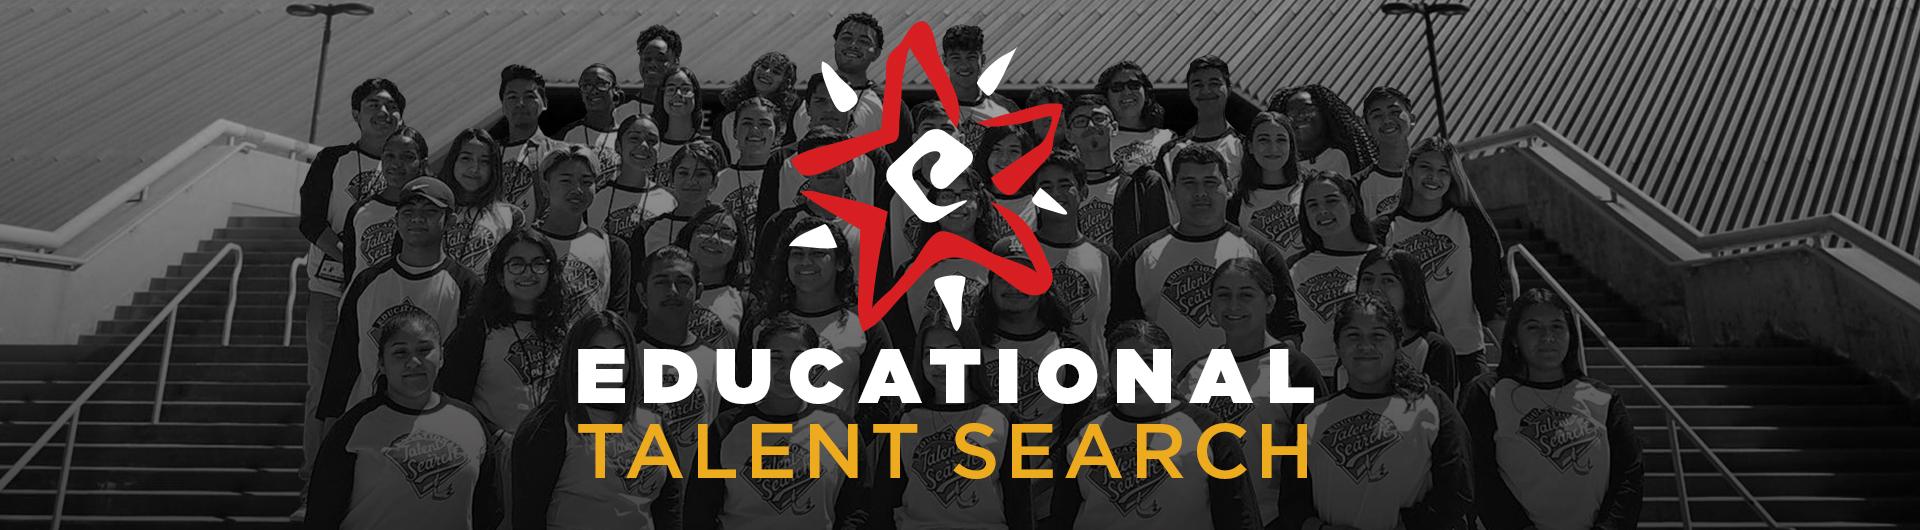 Banner for Education Talent Search